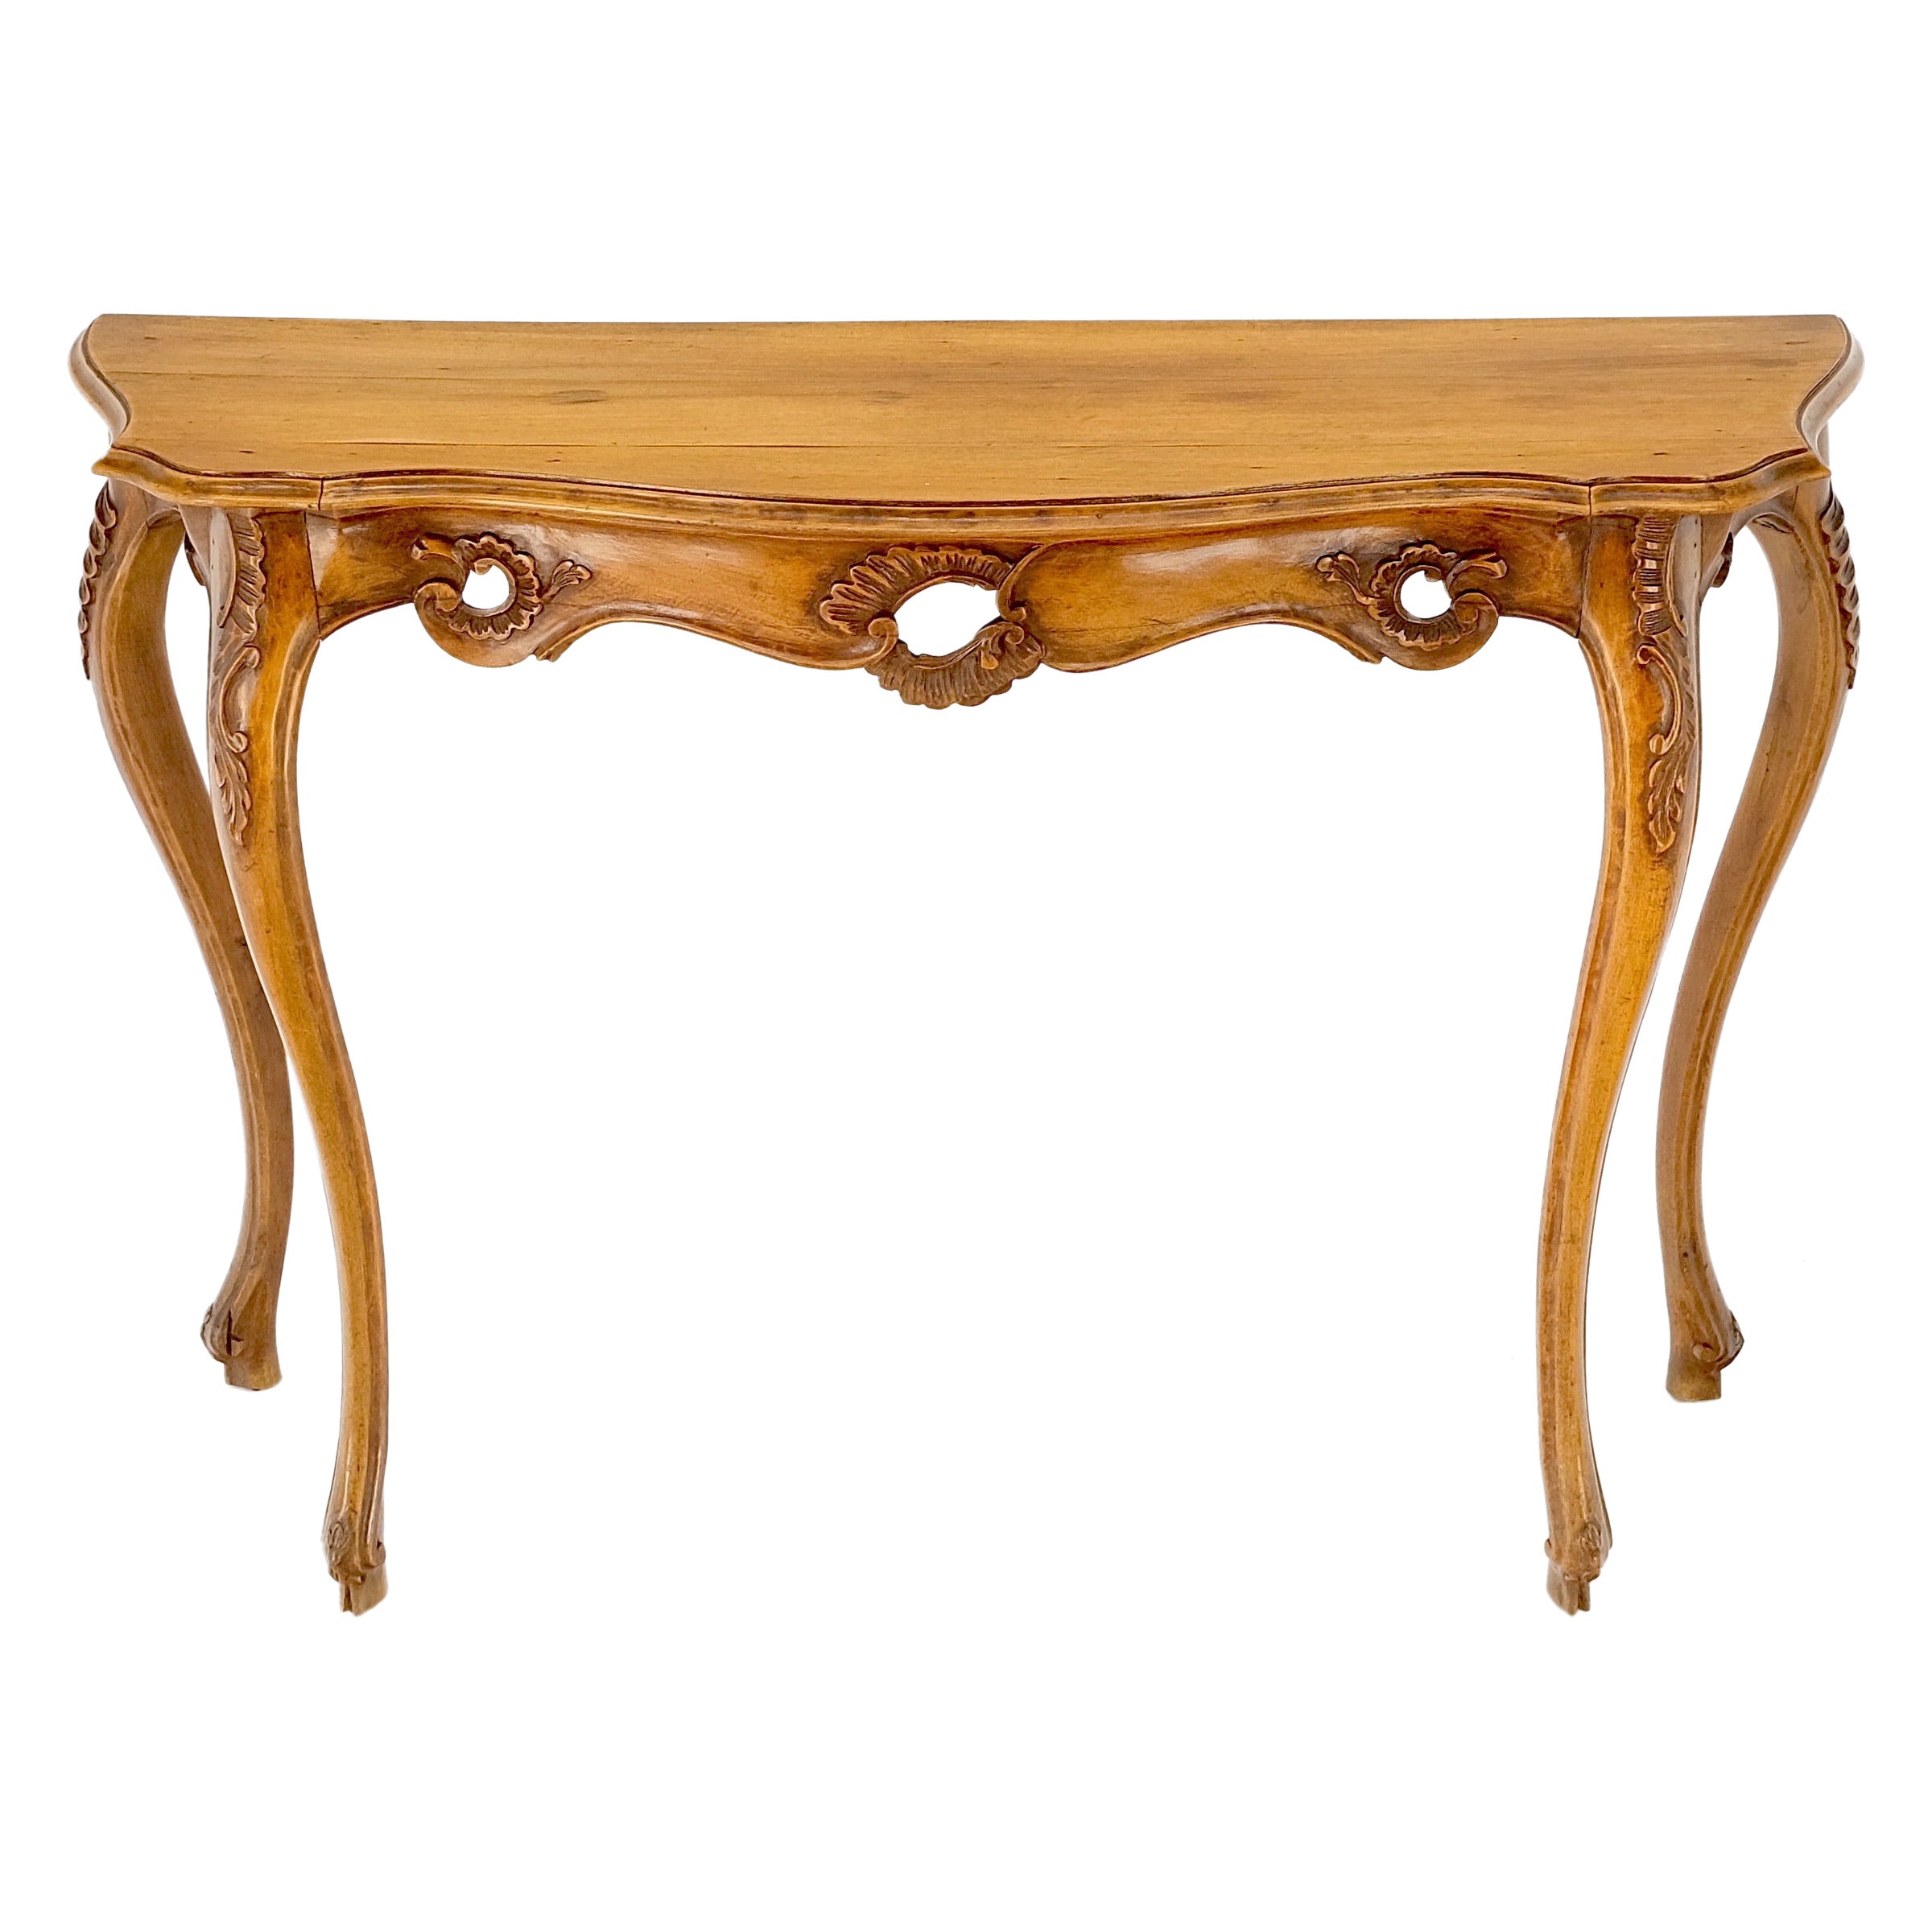 Carved Italian Demilune Console Table on Thin Legs Made in Italy